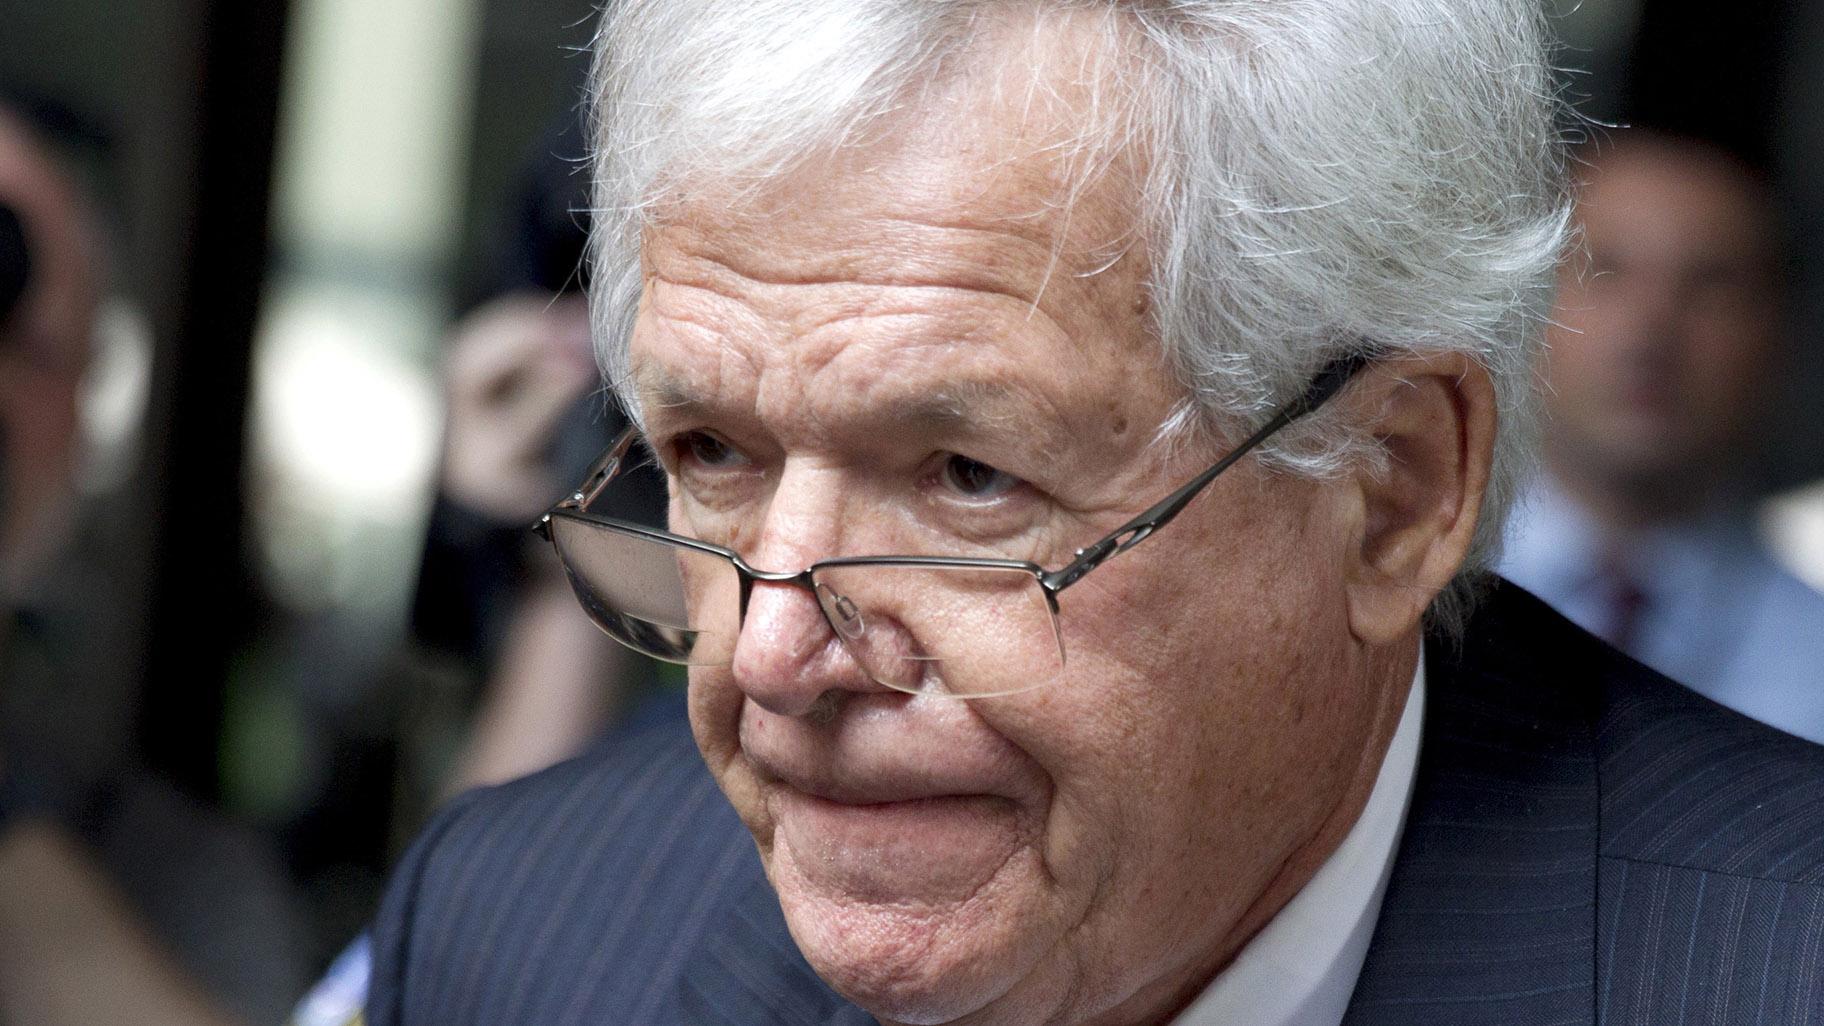 FILE - In this June 9, 2015 file photo, former House Speaker Dennis Hastert departs the federal courthouse, in Chicago. A judge on Wednesday, Sept. 29, 2021, finalized an out-of-court settlement between Hastert and a man who alleged that Hastert sexually abused him decades ago. (AP Photo/Christian K. Lee, File)